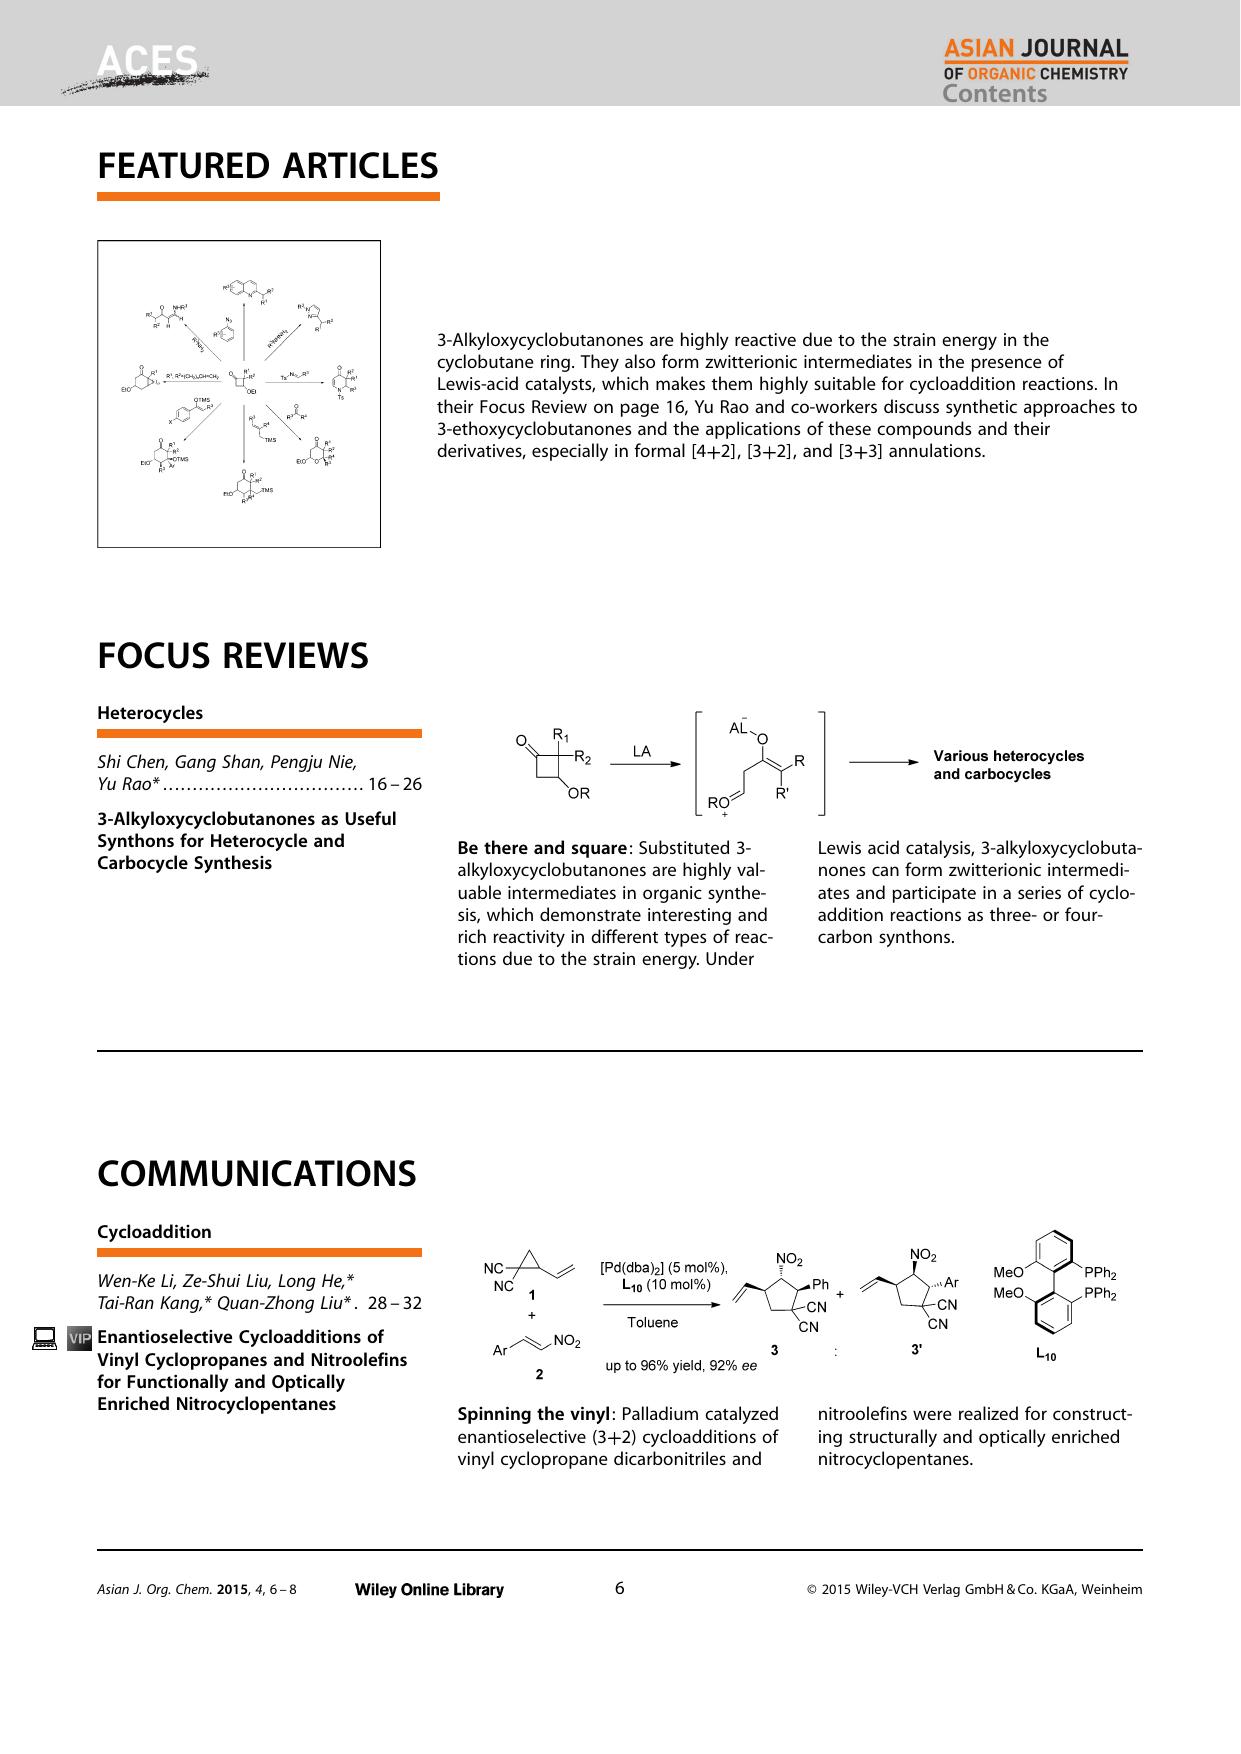 Graphical Abstract: Asian J. Org. Chem. 12015 by Unknown